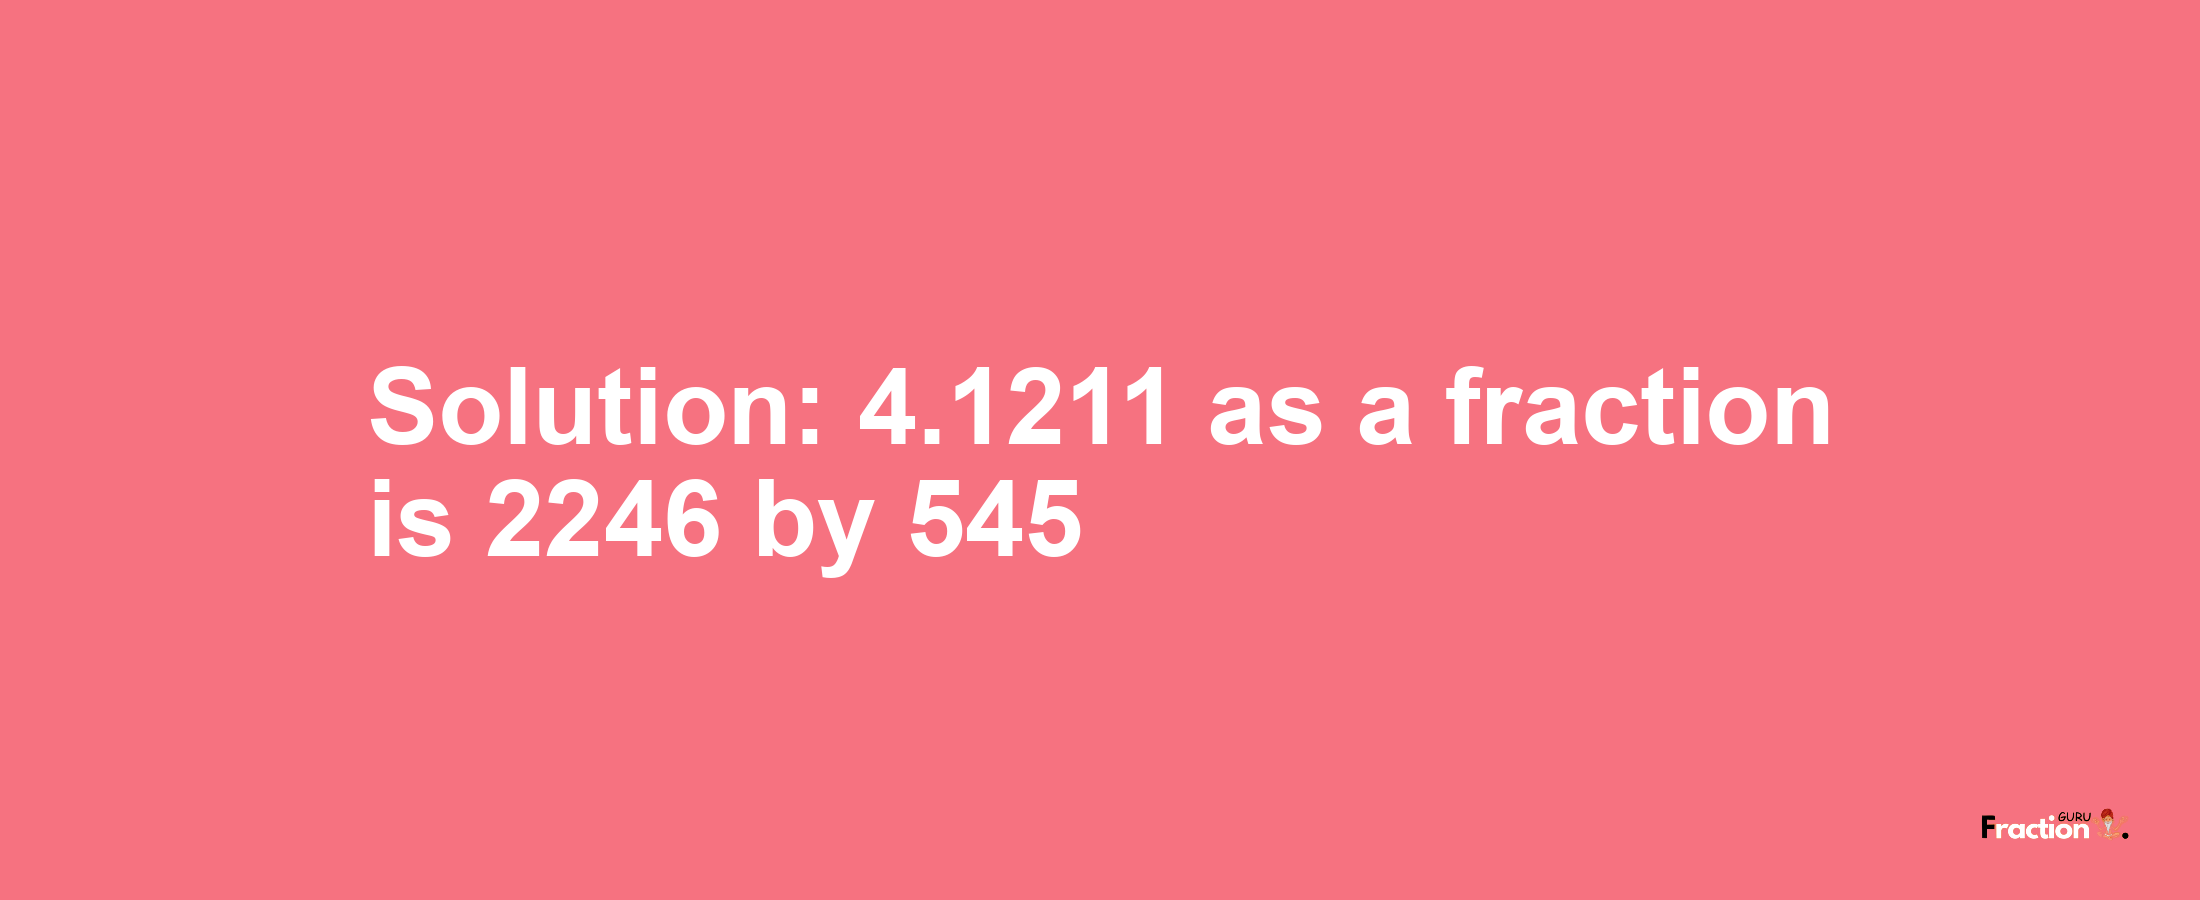 Solution:4.1211 as a fraction is 2246/545